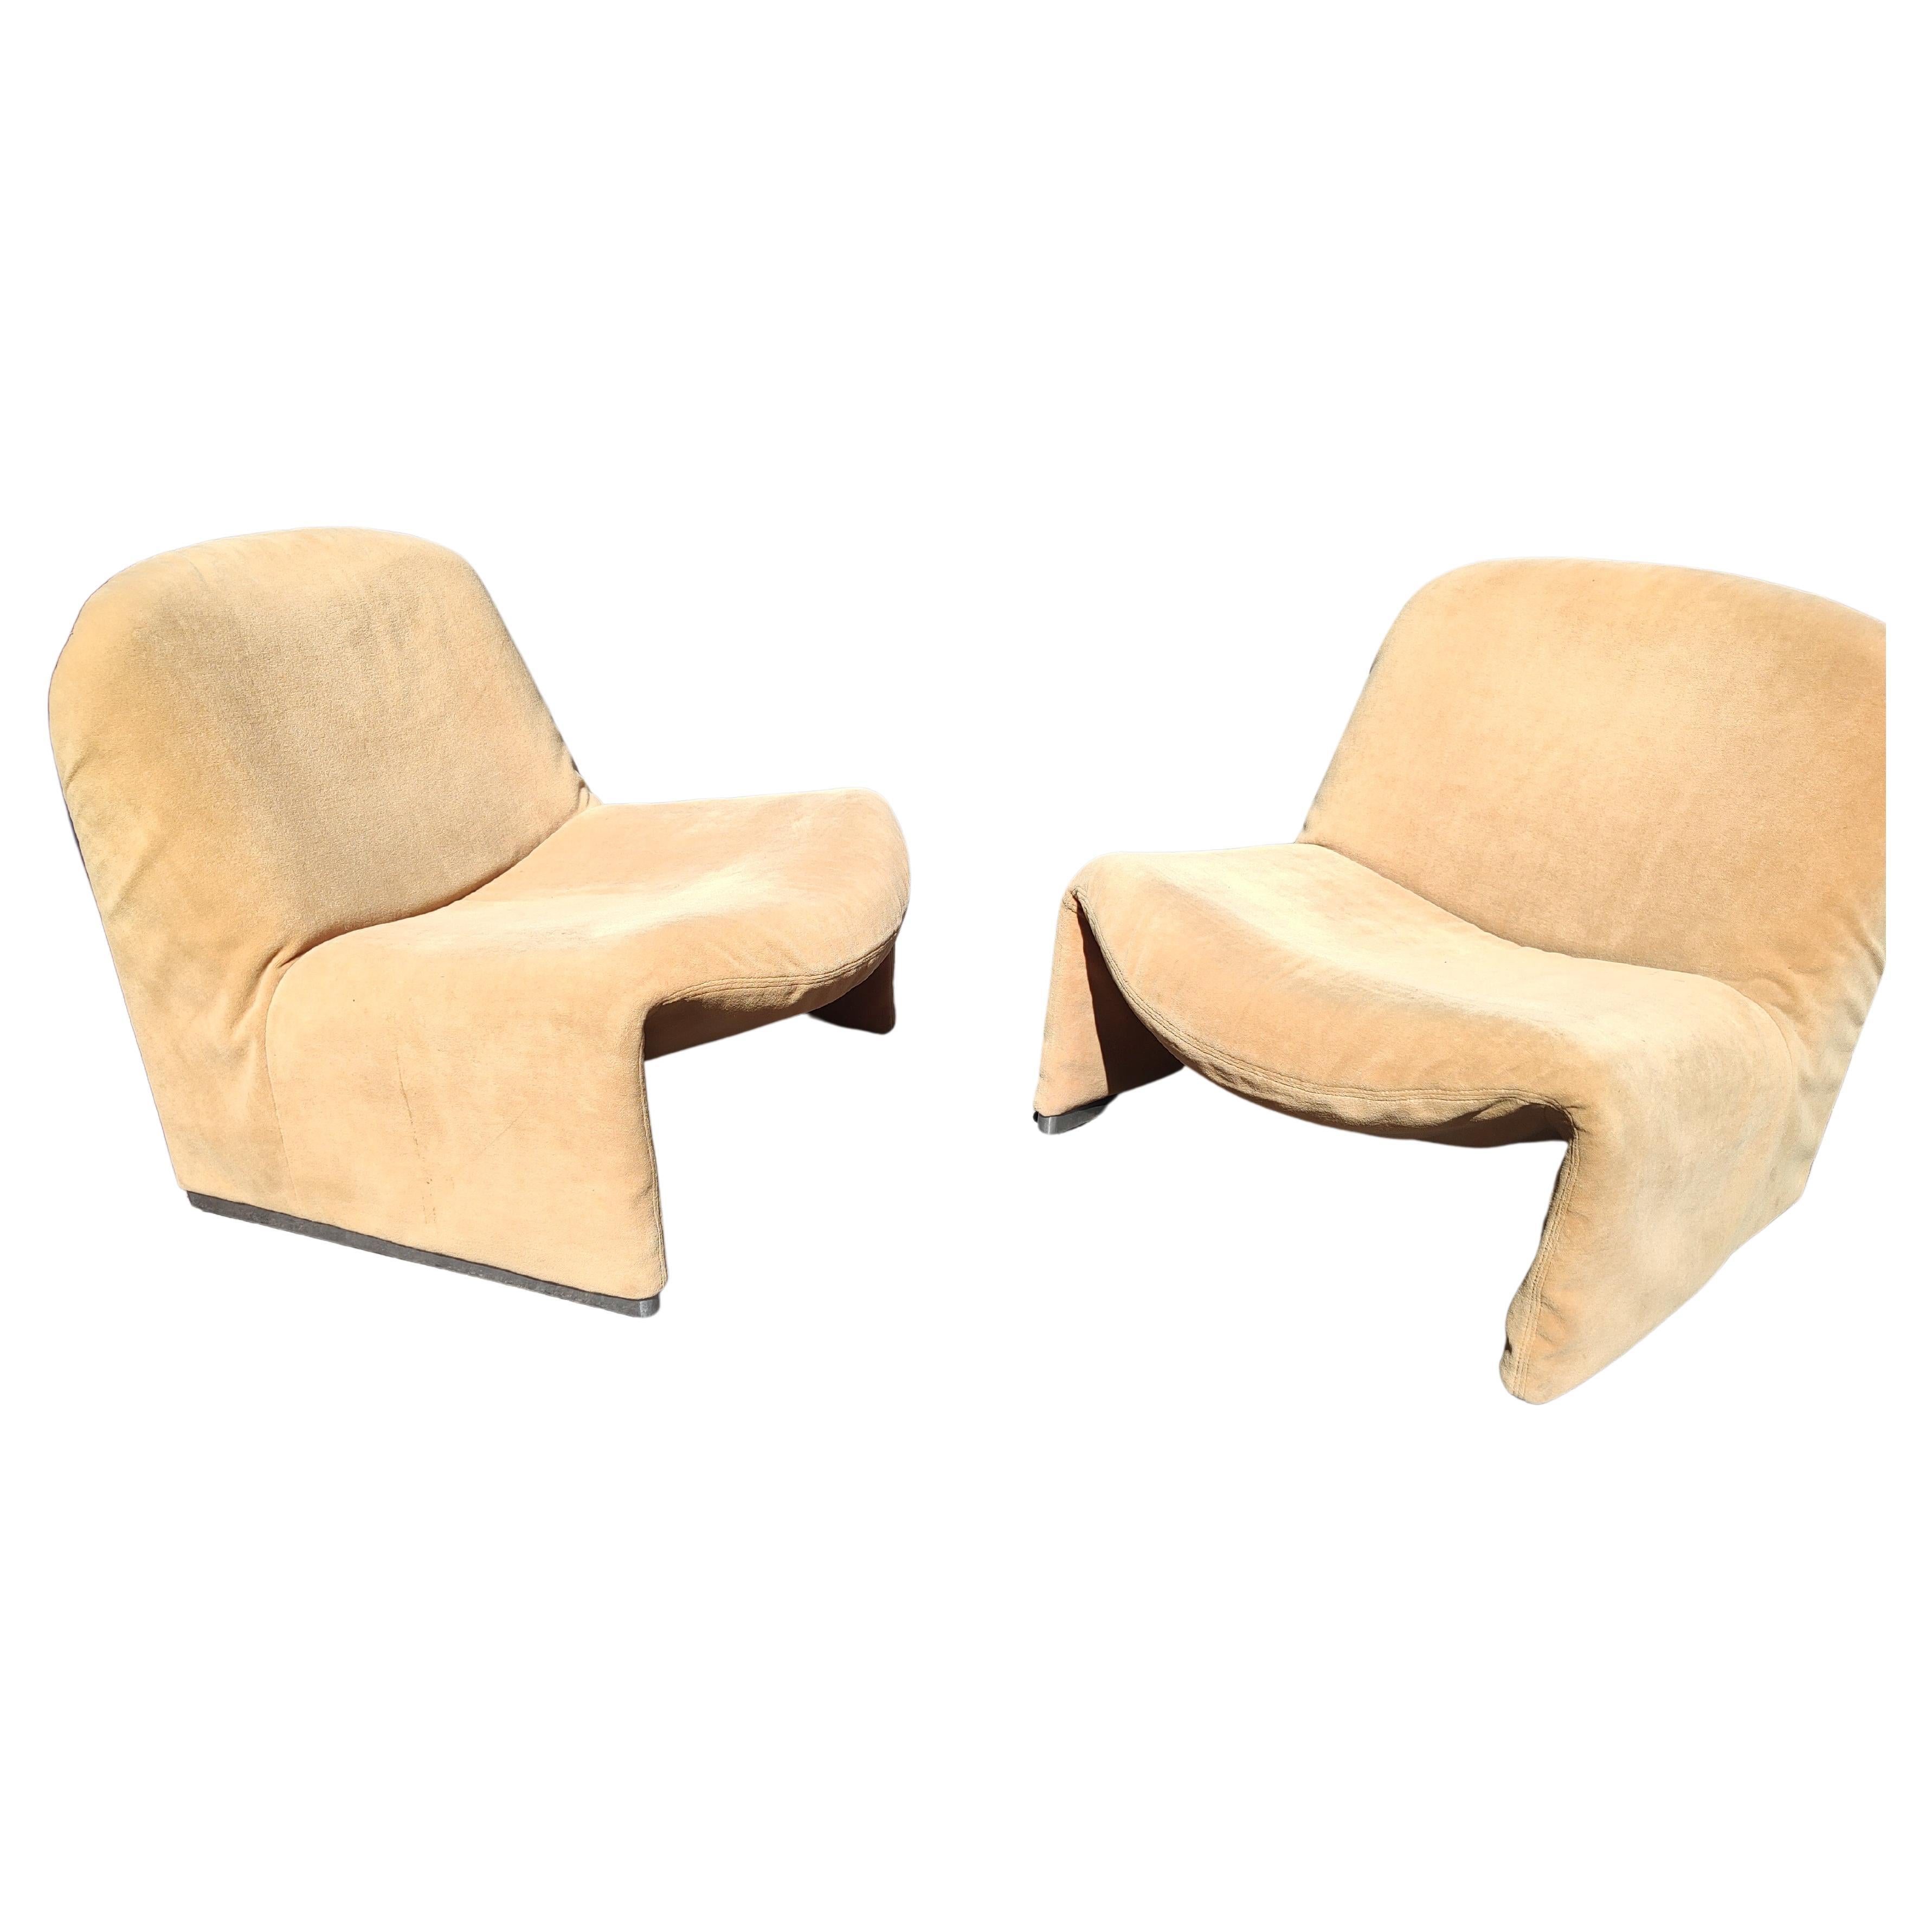 Fantastic pair of vintage 1969 Alky chairs designed by Giancarlo Piretti for Artifort. In what appears to be original fabric which shows wear from normal use and age. Aluminum feet and foam padding totally intact and ready for a makeover. Priced and